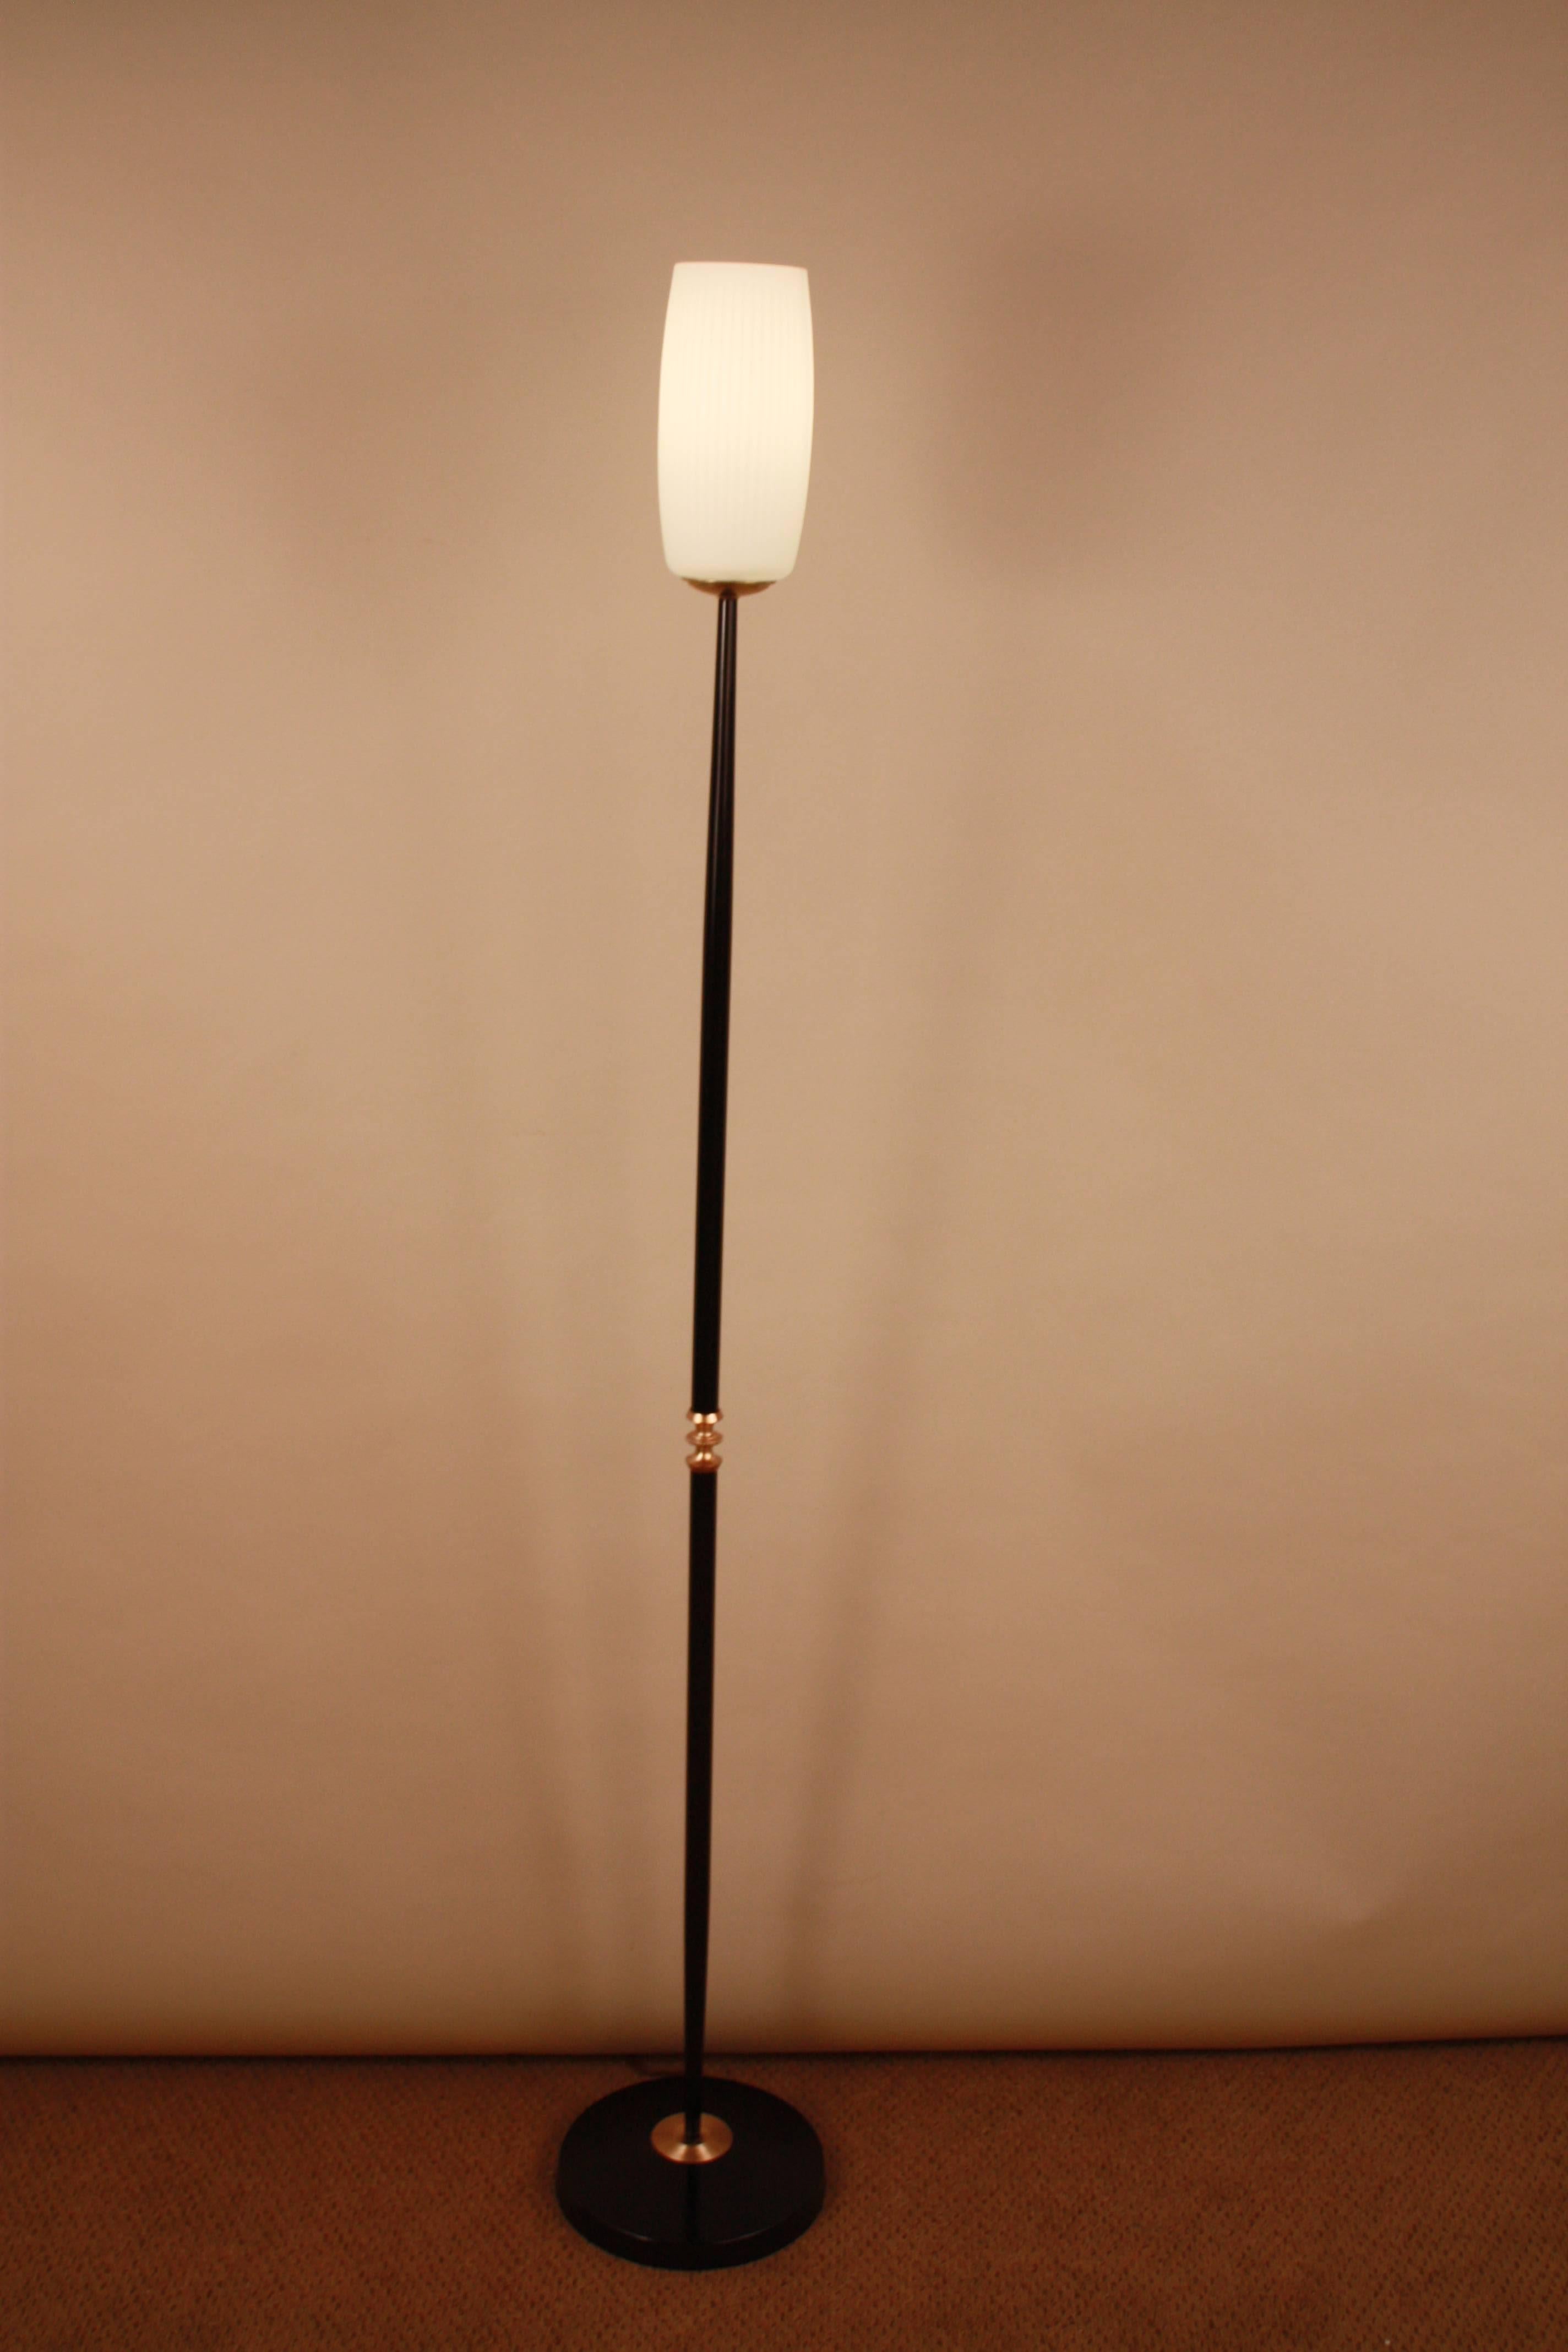 Simple but elegant single light lacquered and bronze floor lamp with textured glass shade.